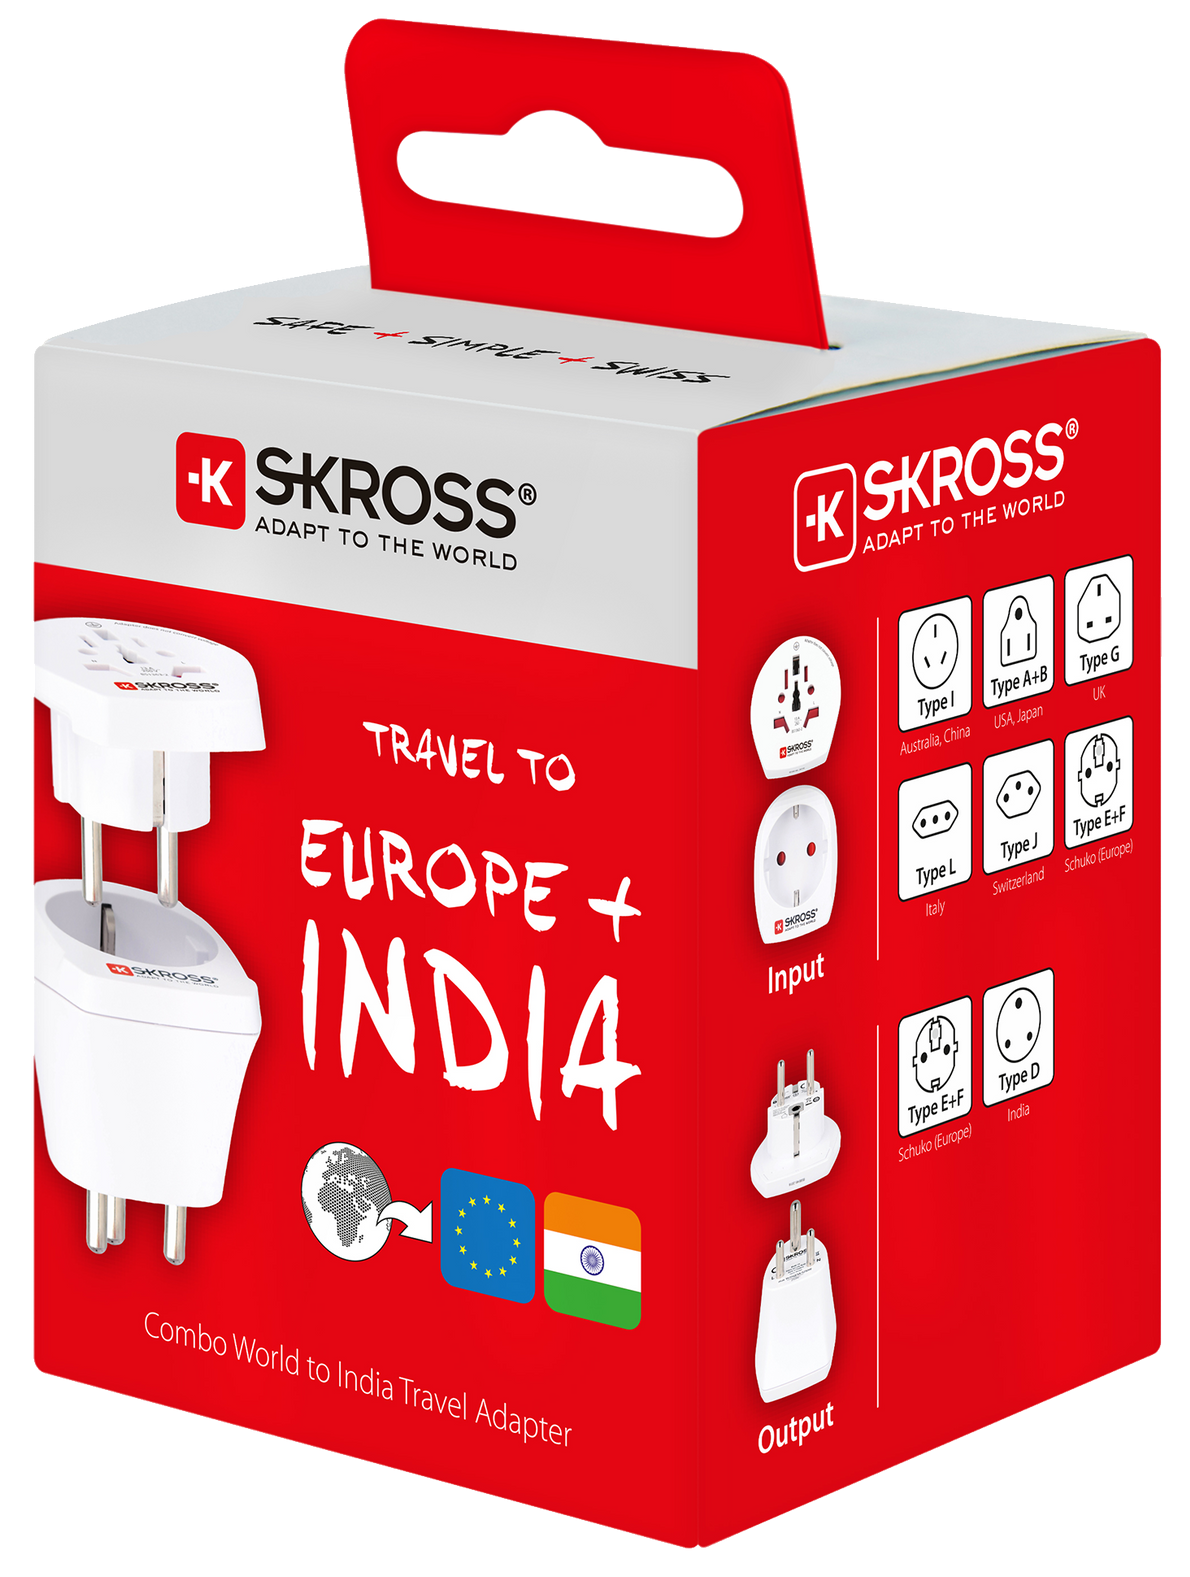 Skross 3-Pole Combo World to India Travel Adapter Packaging